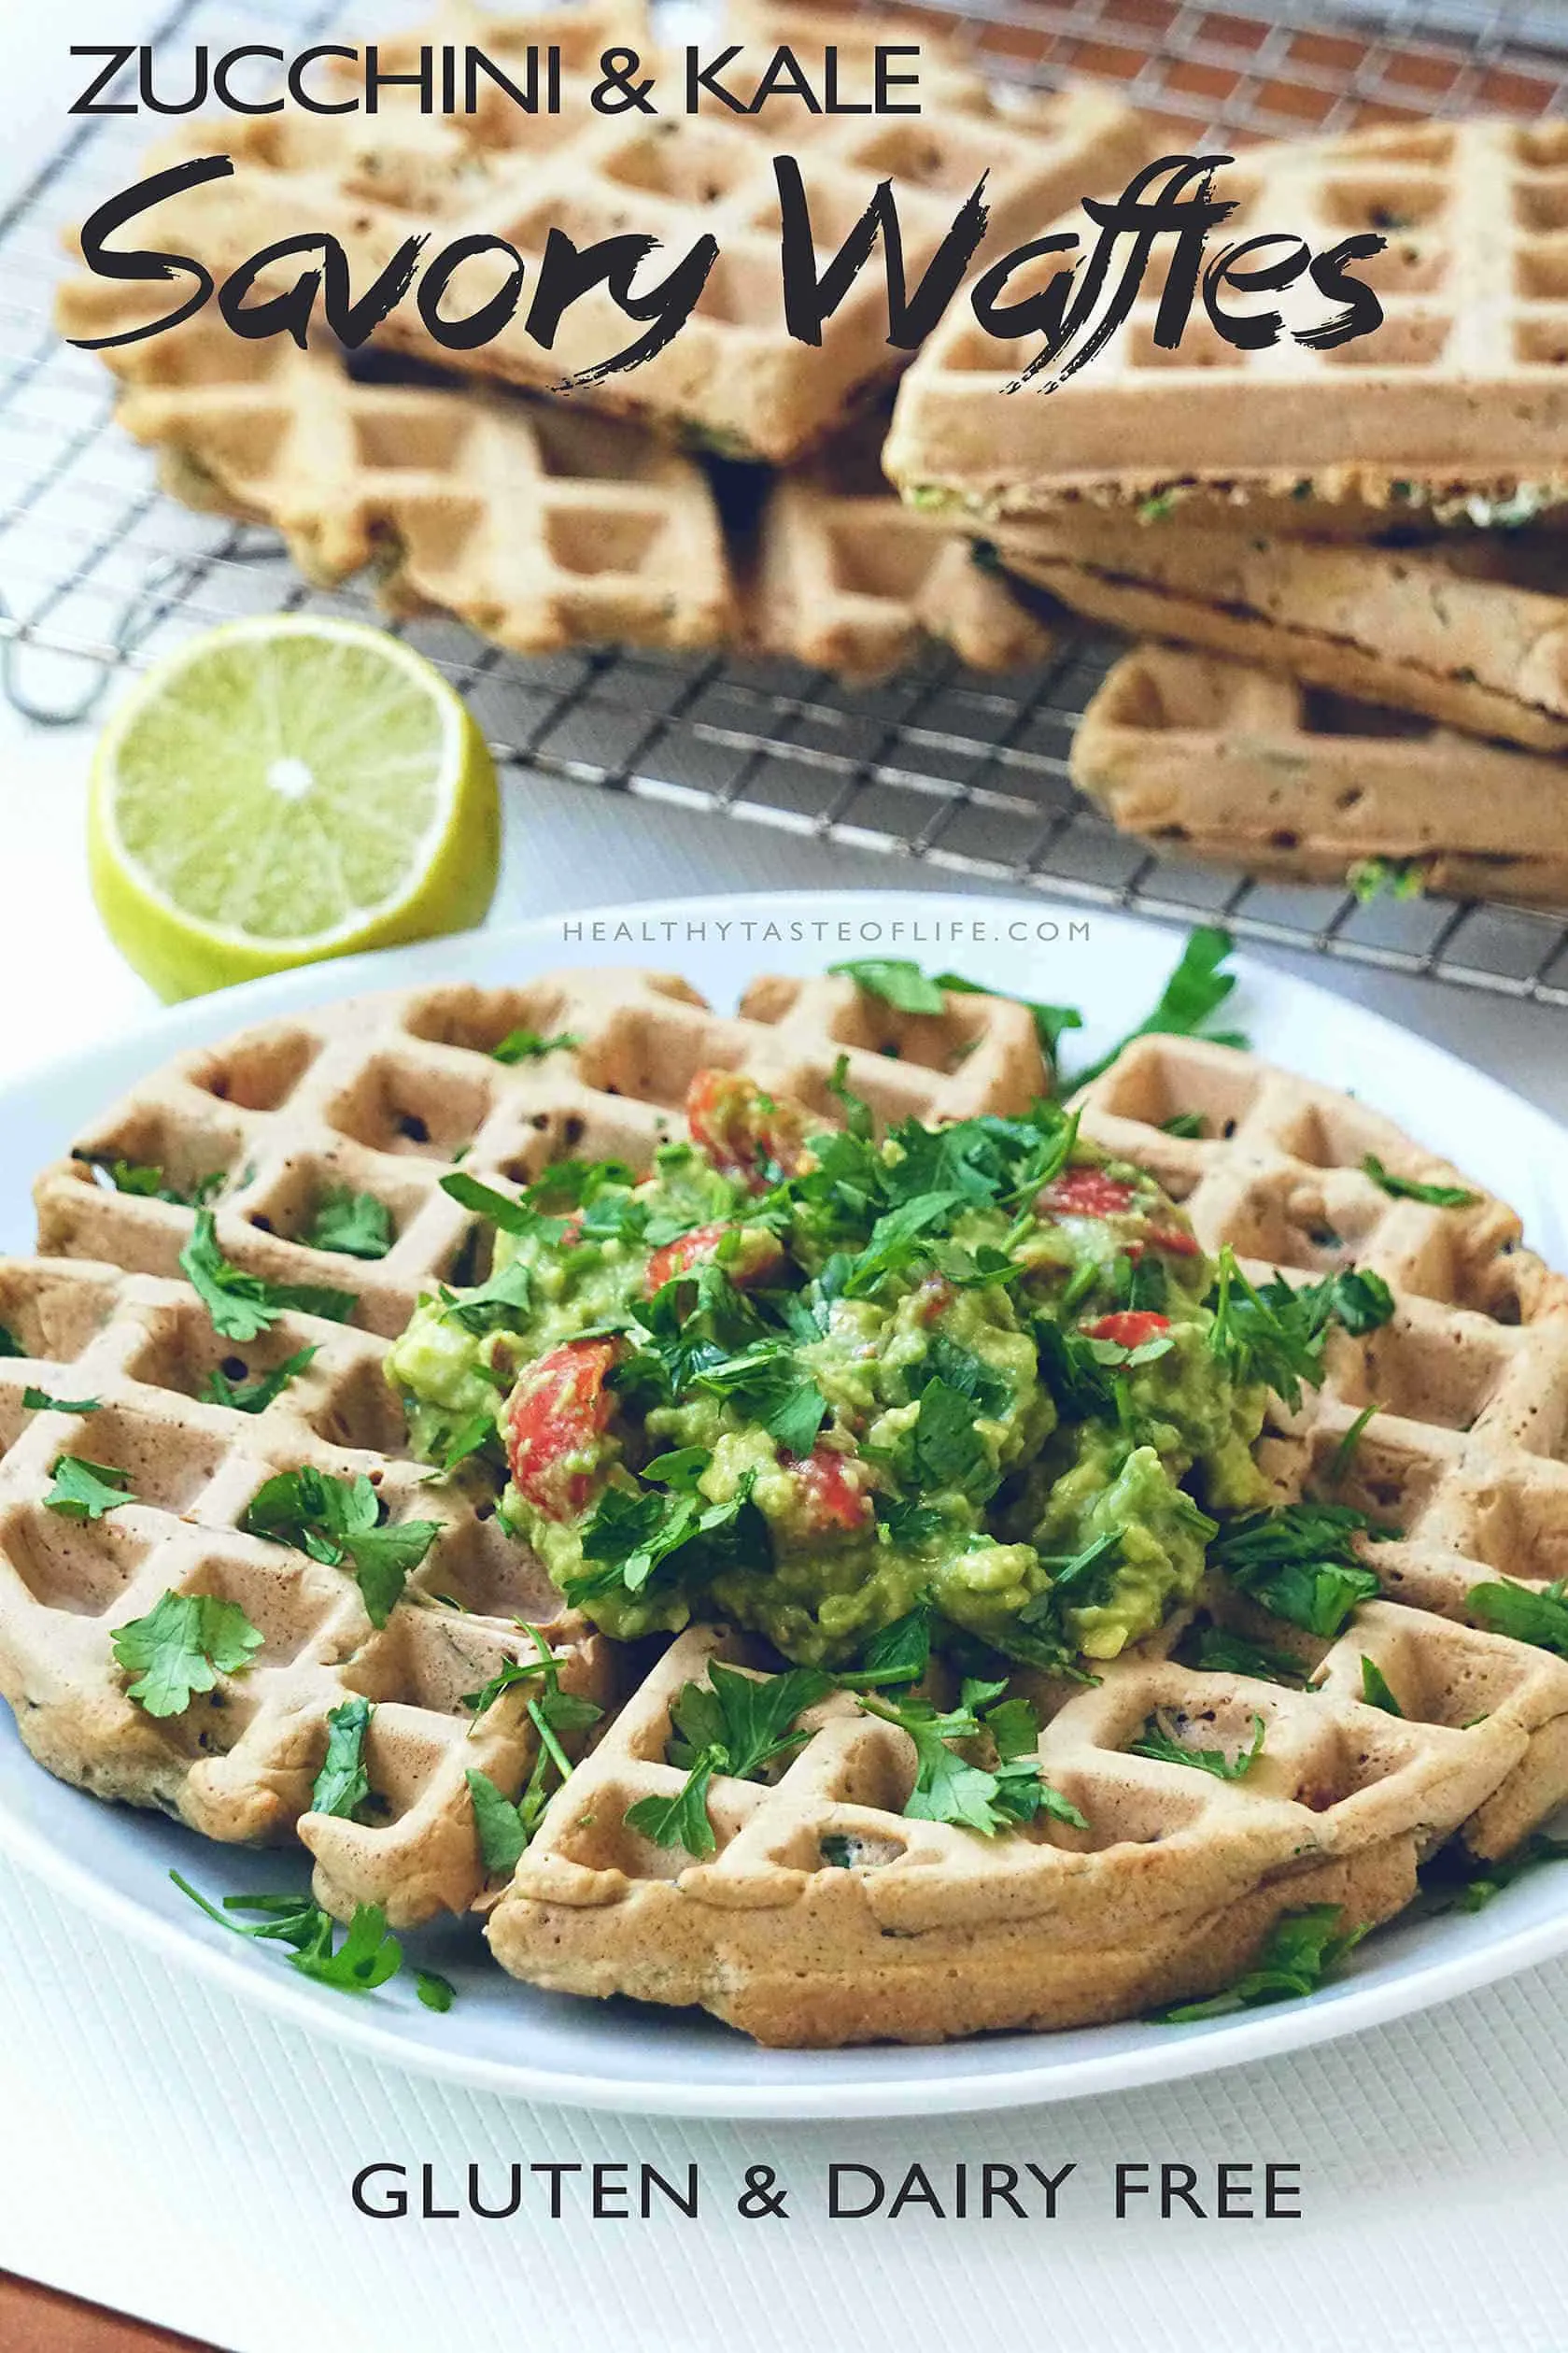 Learn how to make healthy gluten free savory waffles. This savory veggie waffles recipe is great for a clean eating brunch / breakfast or a healthy snack for kids. These waffles are dairy free, gluten free and can be served for lunch or dinner too!